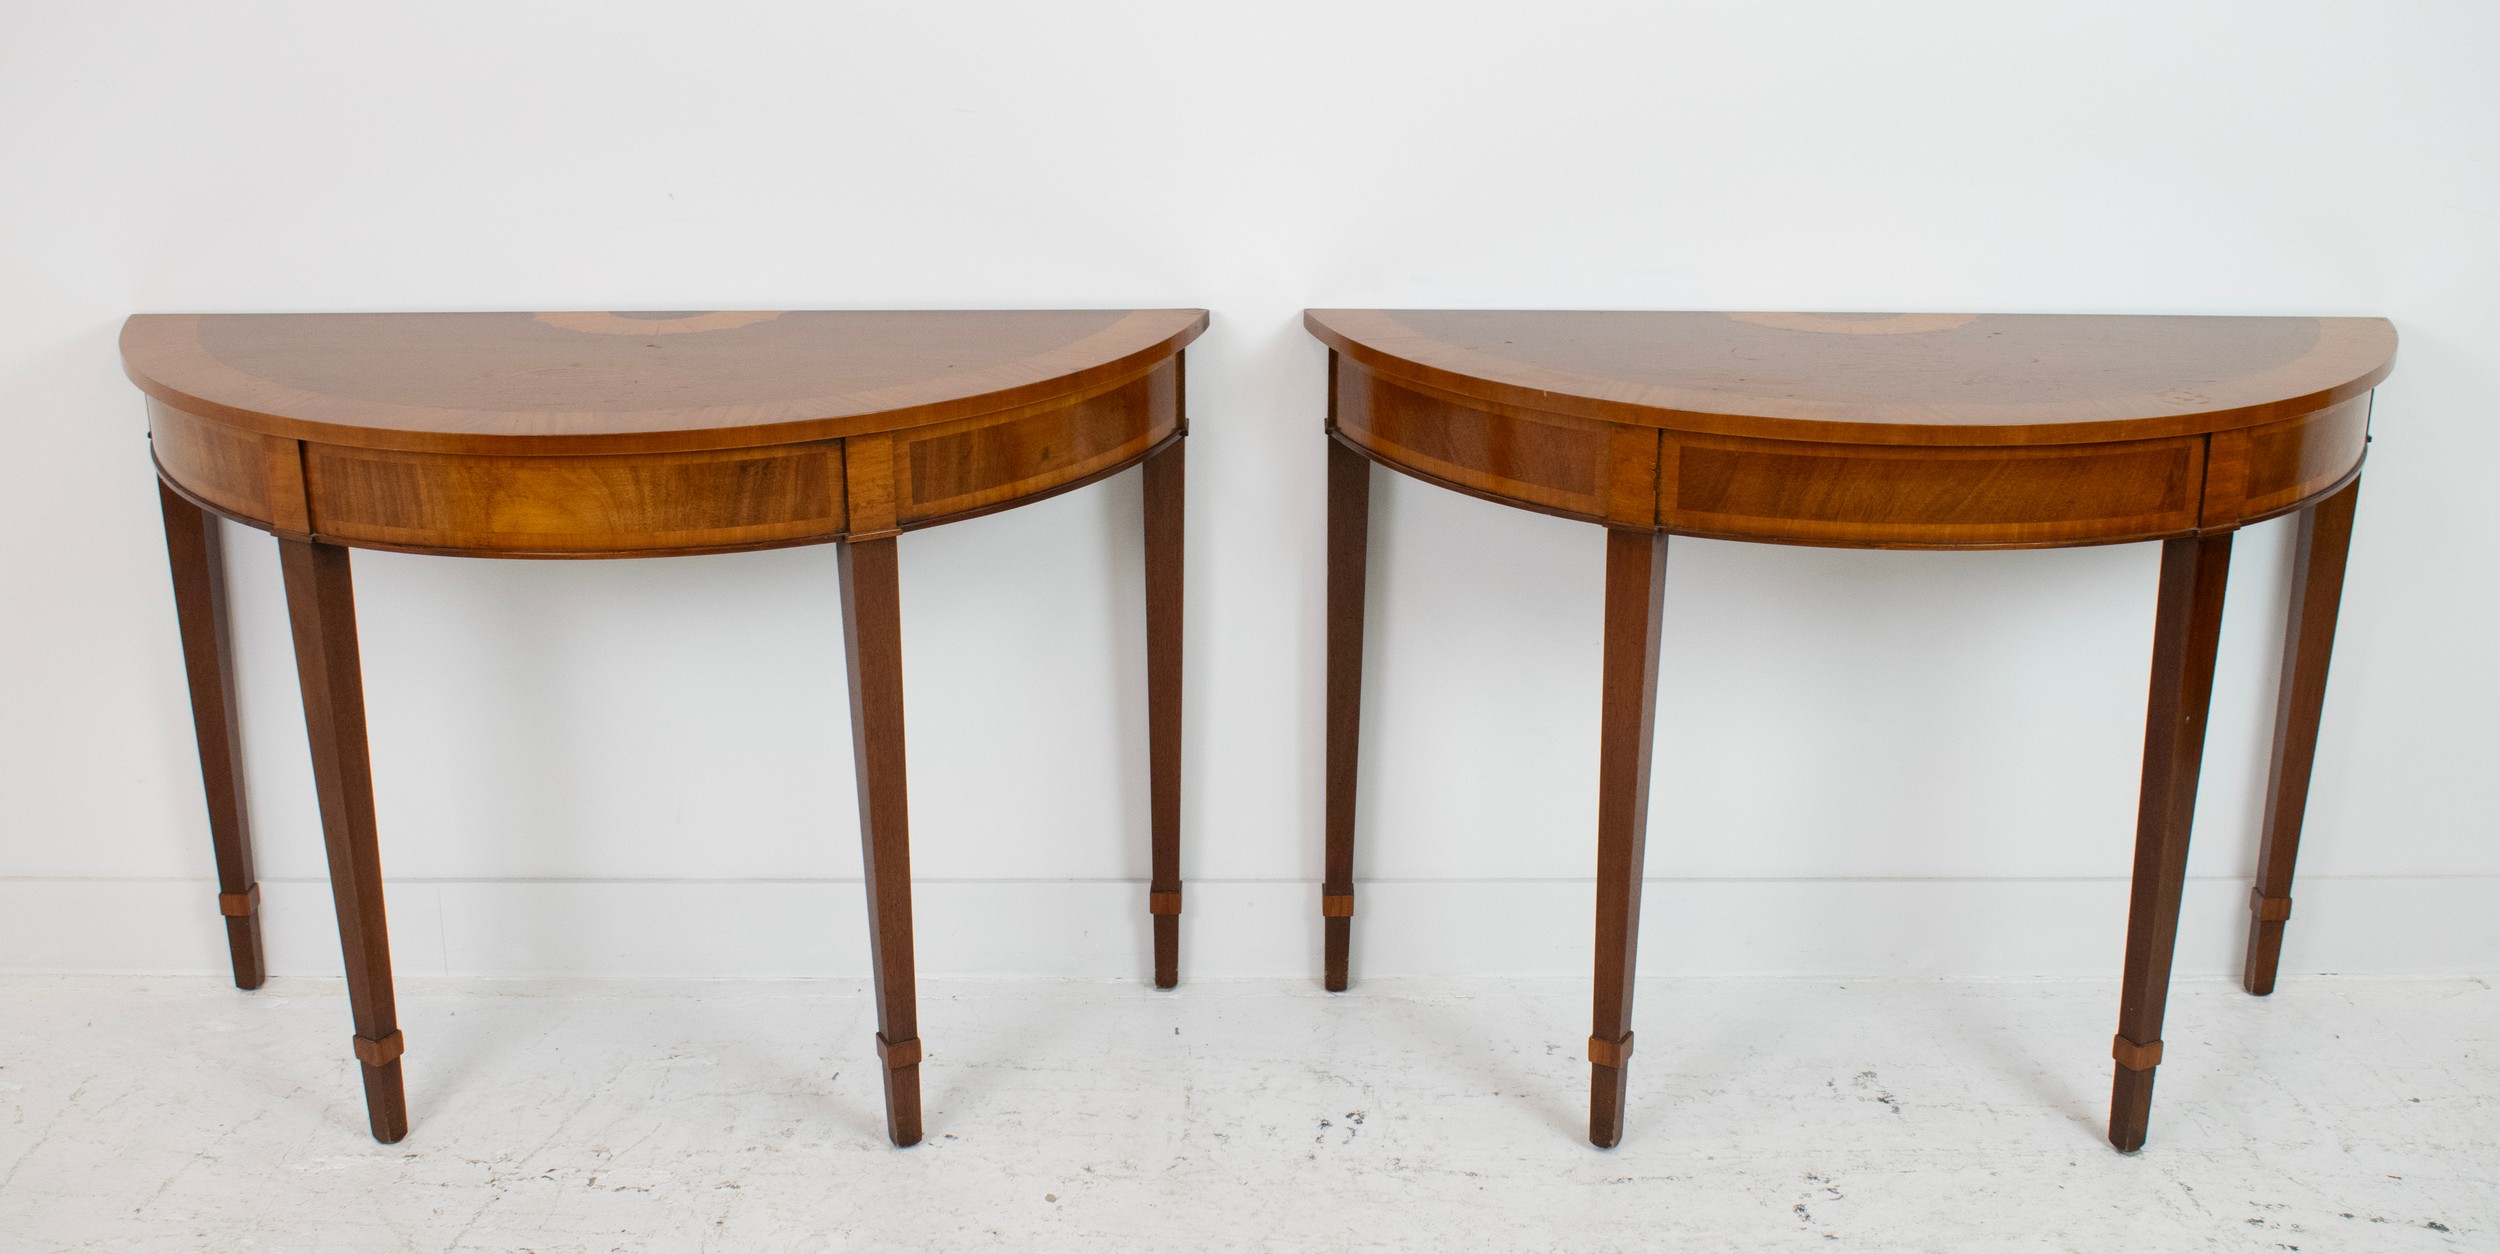 DEMI LUNE TABLES, a pair, George III design mahogany and satinwood inlaid, 77cm H x 112cm x 47cm. (